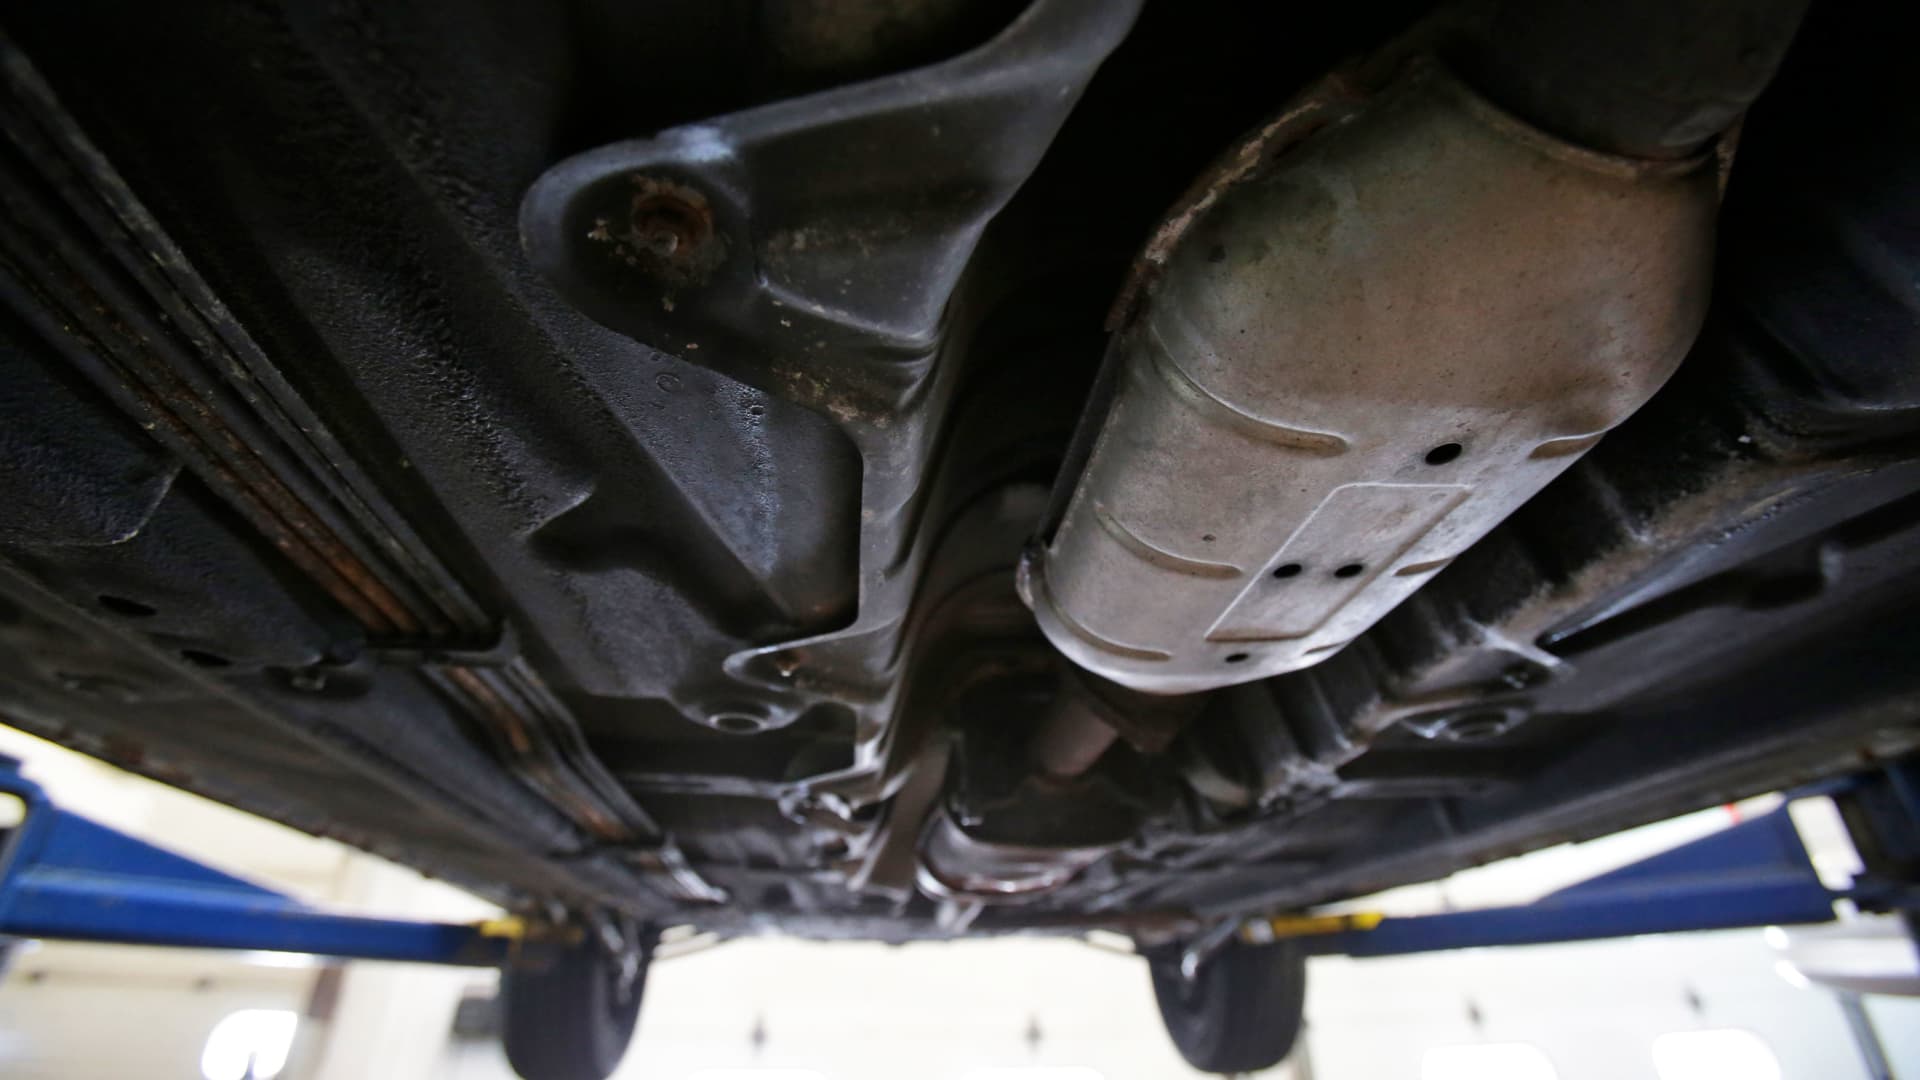 Why thefts of cars and pricey car parts have skyrocketed